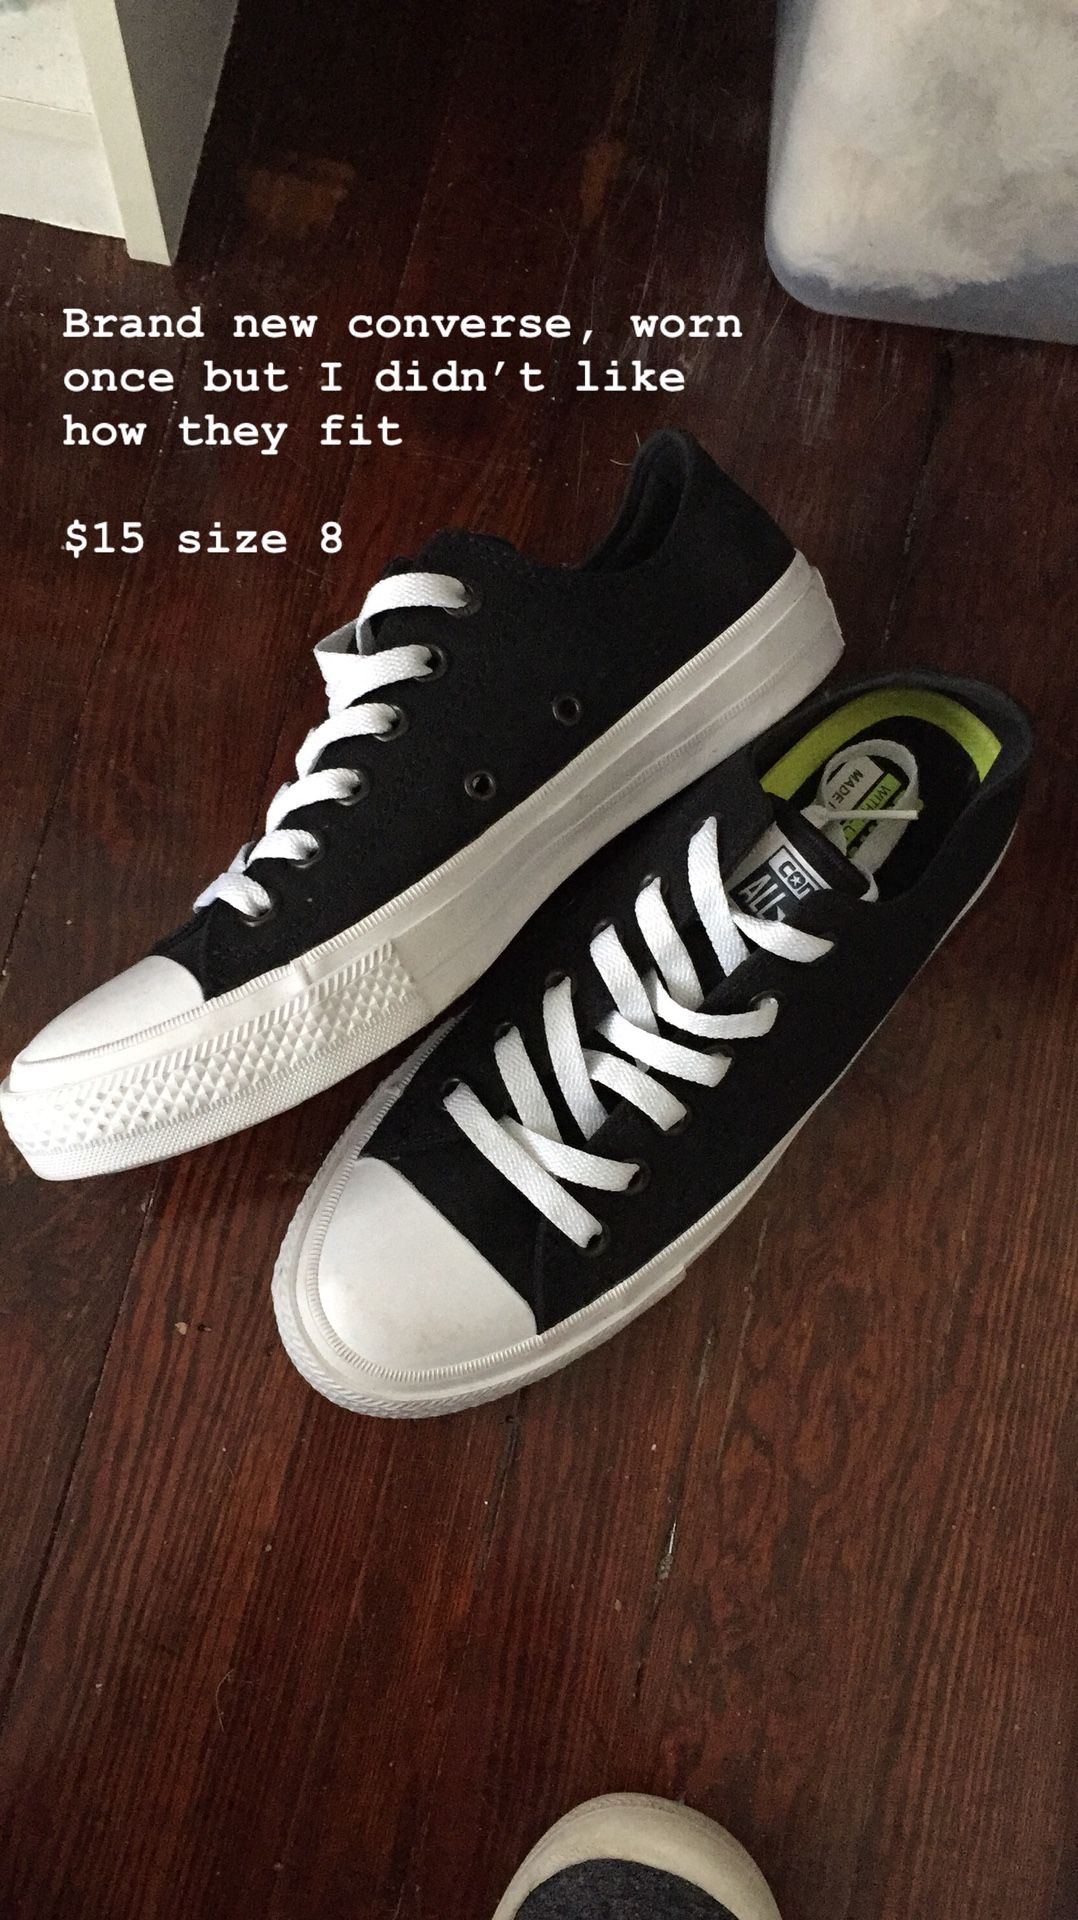 Converse All-Star size 8